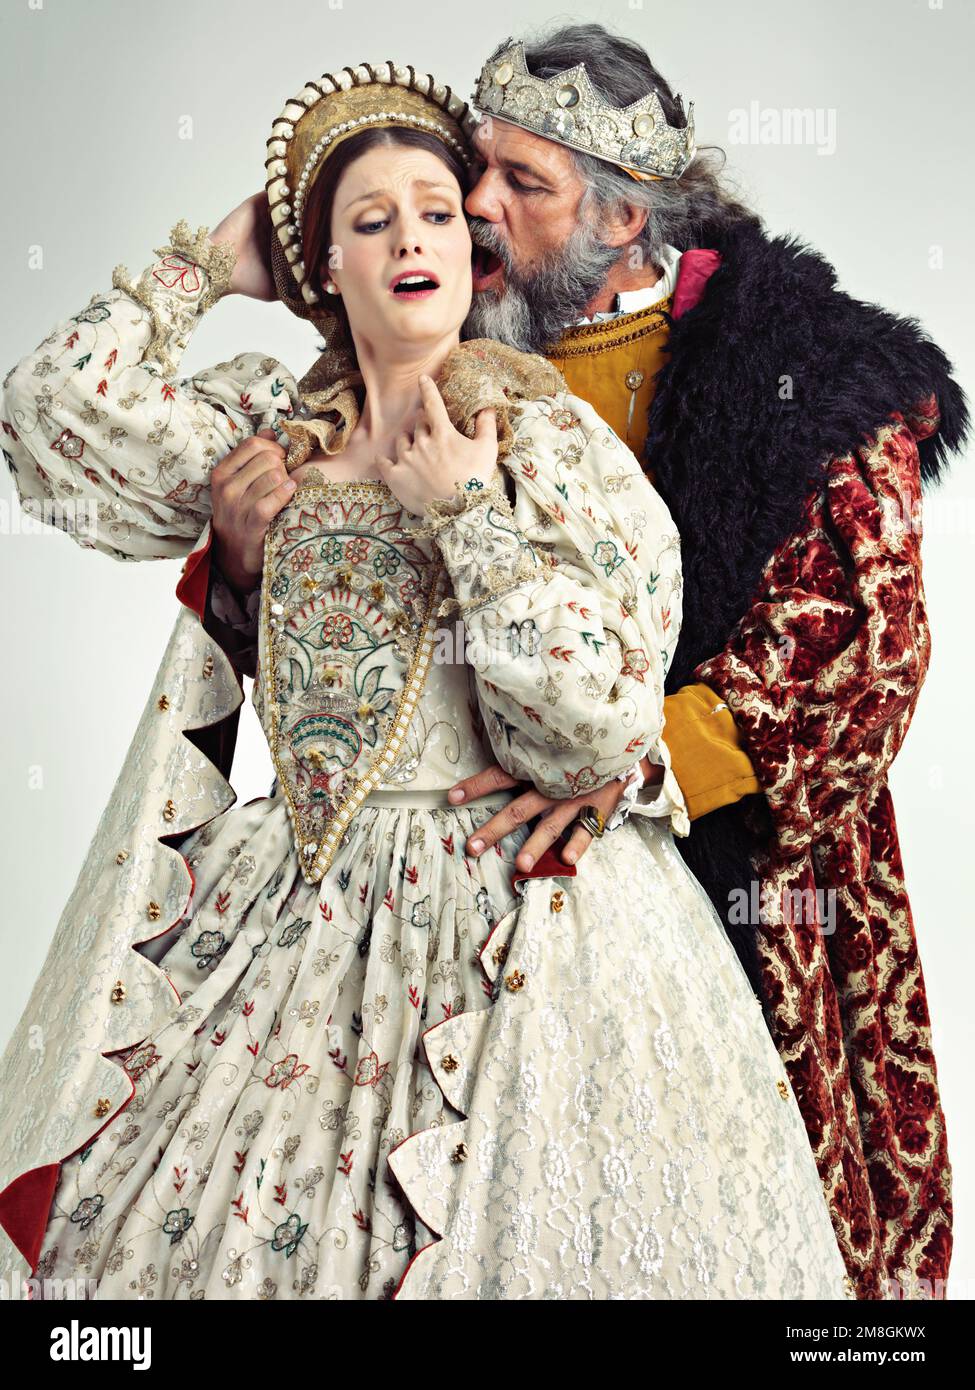 https://c8.alamy.com/comp/2M8GKWX/medieval-king-queen-and-violence-in-studio-for-drama-danger-and-together-with-renaissance-clothes-ancient-royal-couple-surprise-and-shock-with-2M8GKWX.jpg